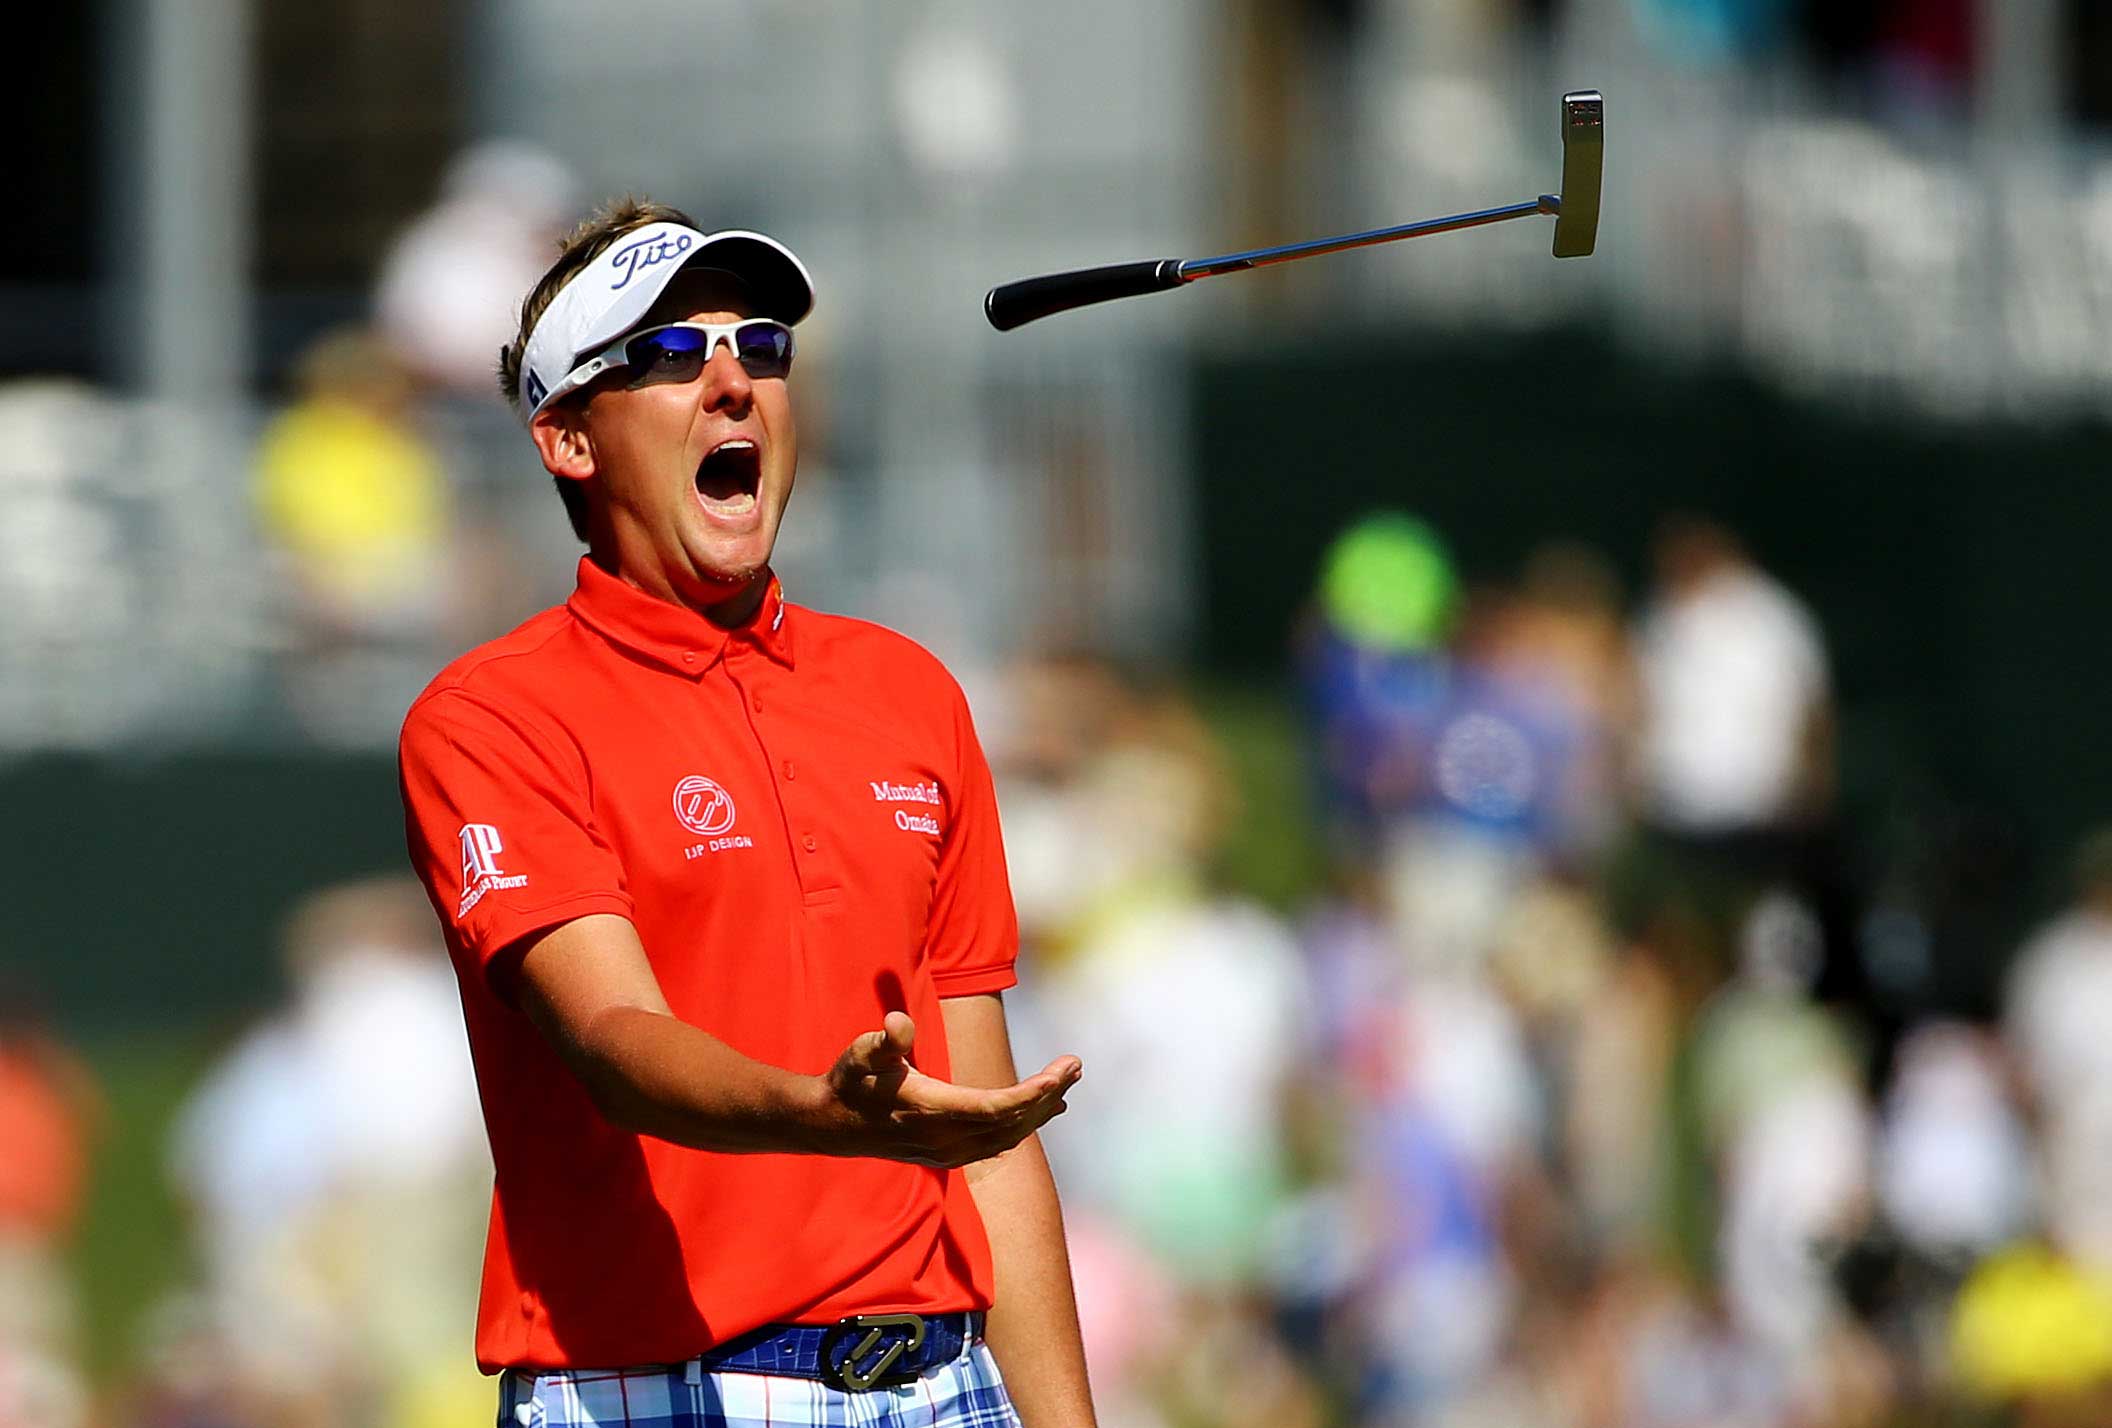 Ian Poulter was beaten by a 14-year-old Horsfield over nine holes (Photo: Getty Images)